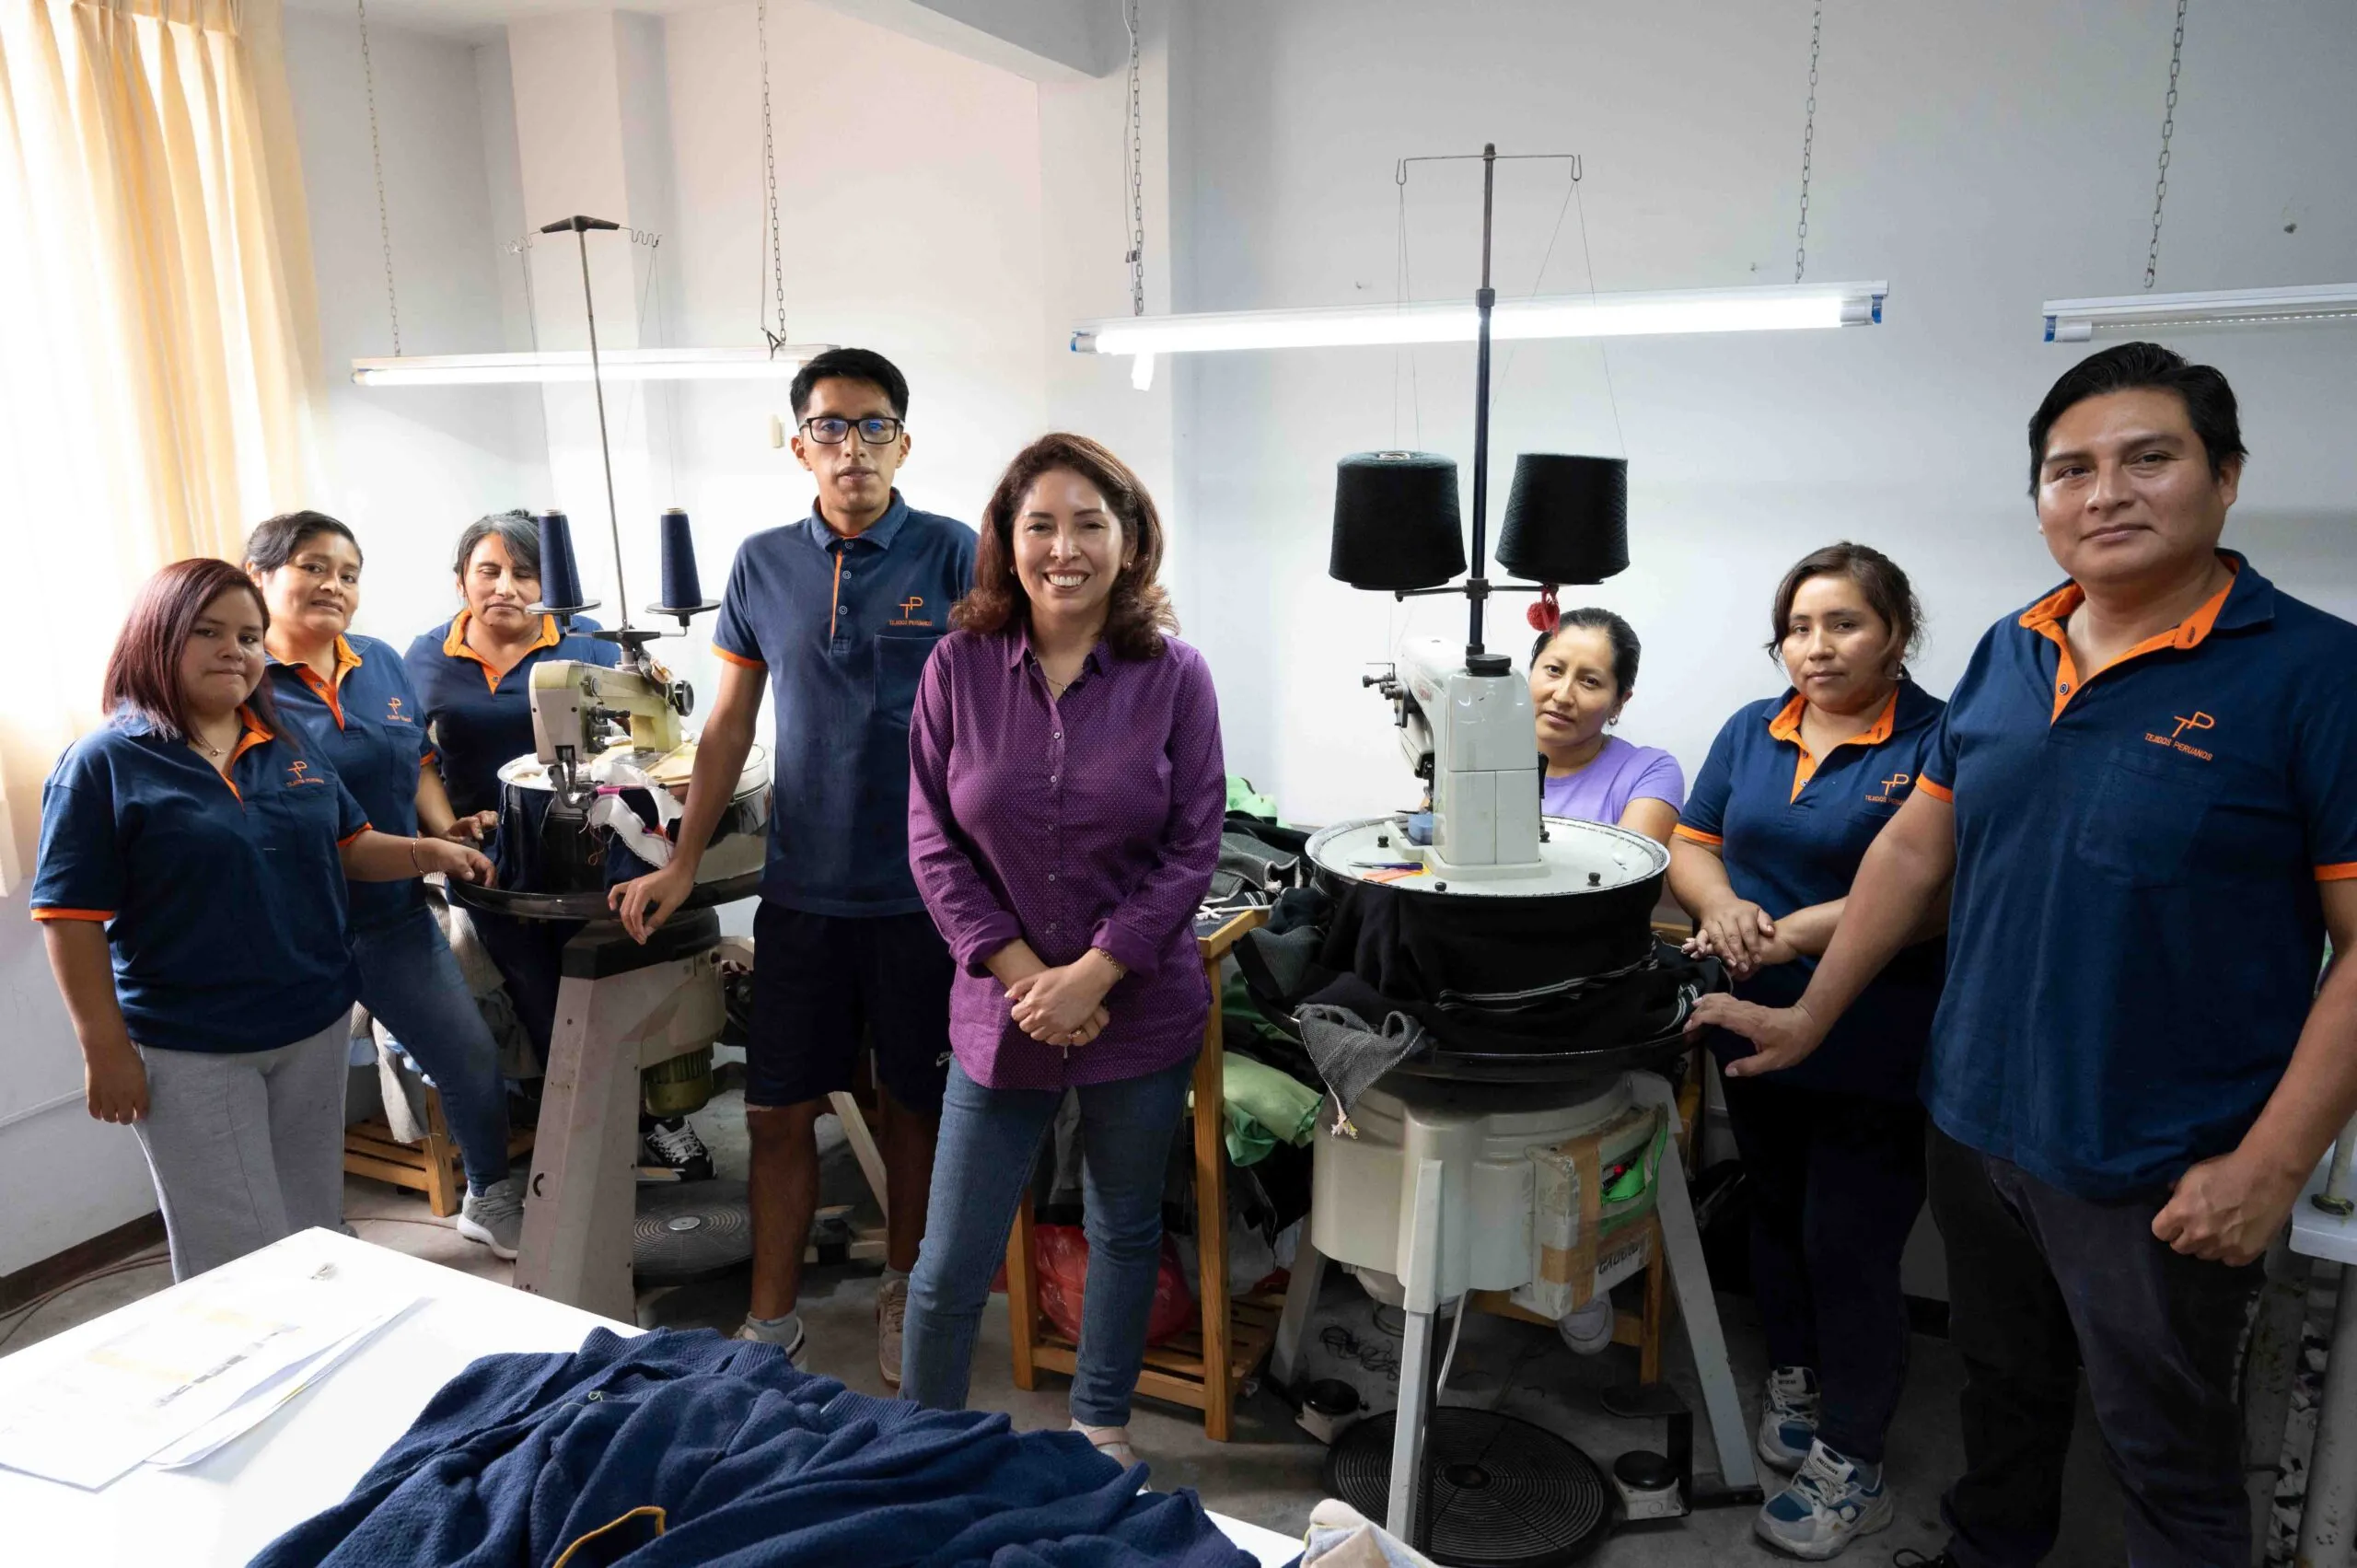 Image of a group of eight people gathered in a room with two sewing machines, a woman in purple at the center.